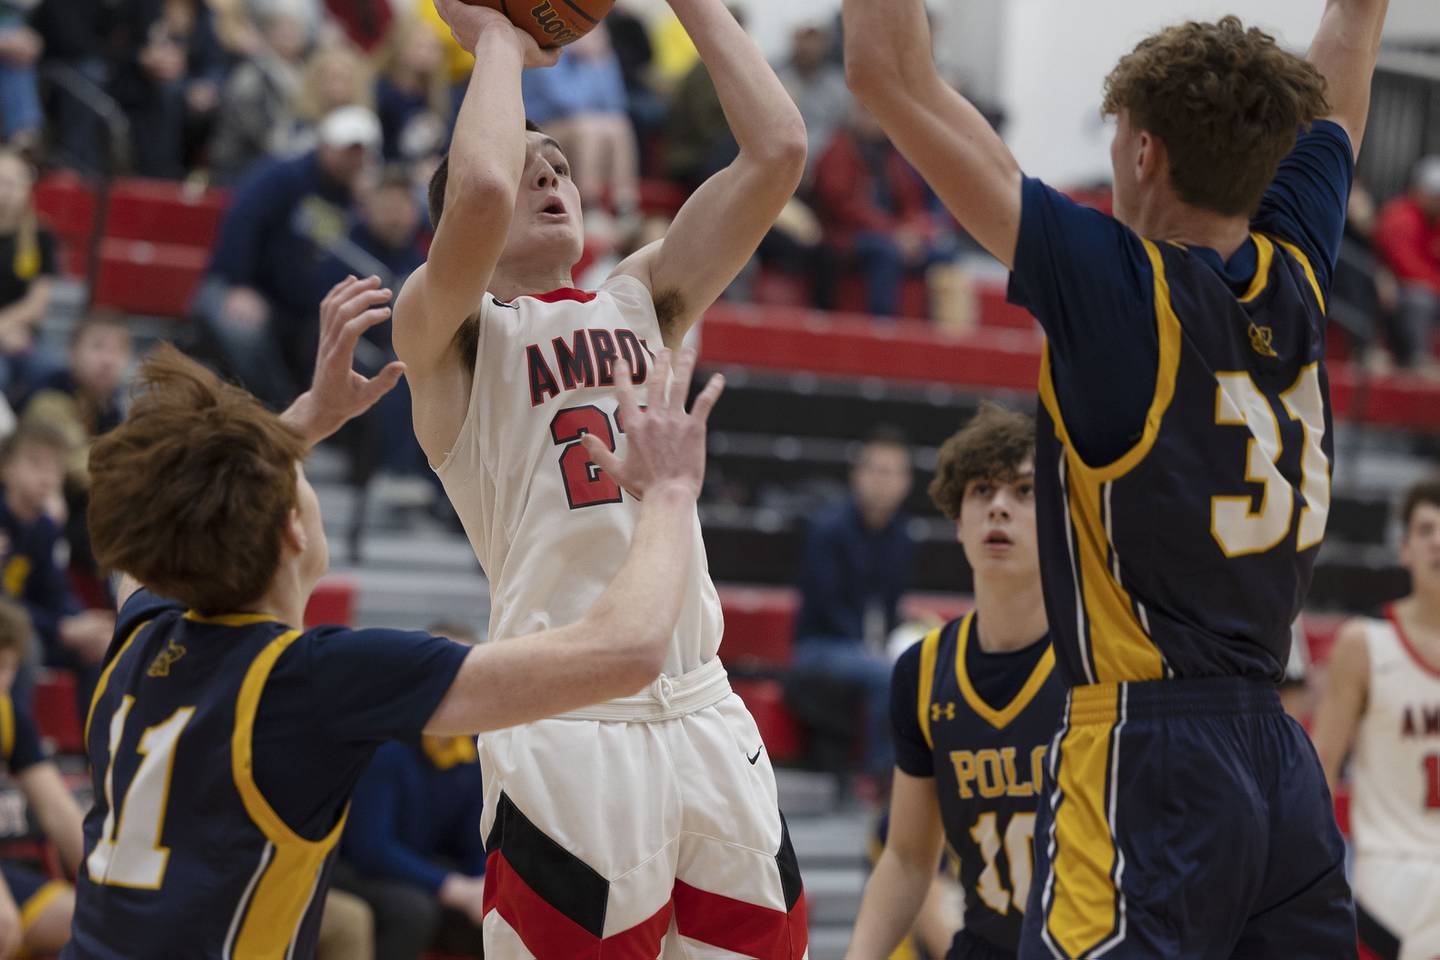 Amboy’s Troy Anderson spots up a jumper Wednesday, Jan. 25, 2023 in a game against Polo.